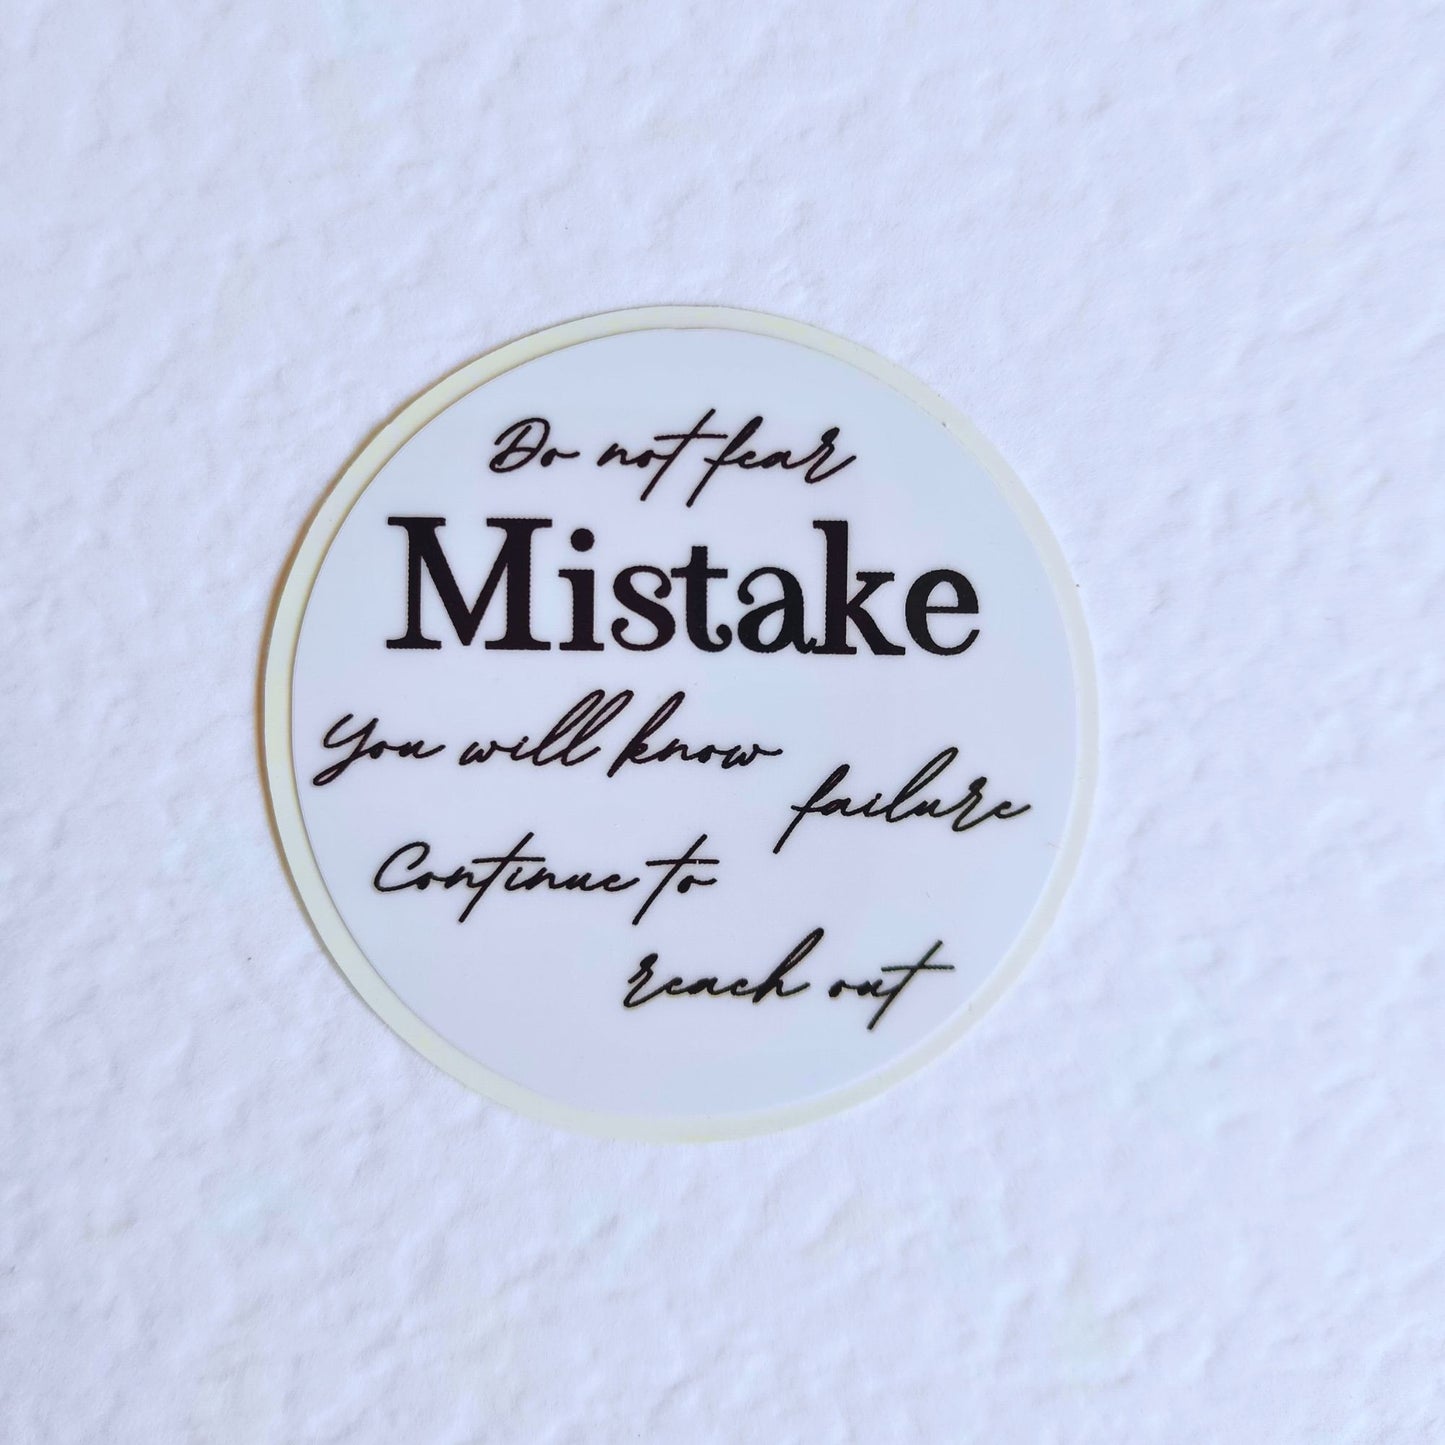 die cut sticker with text do not fear mistake